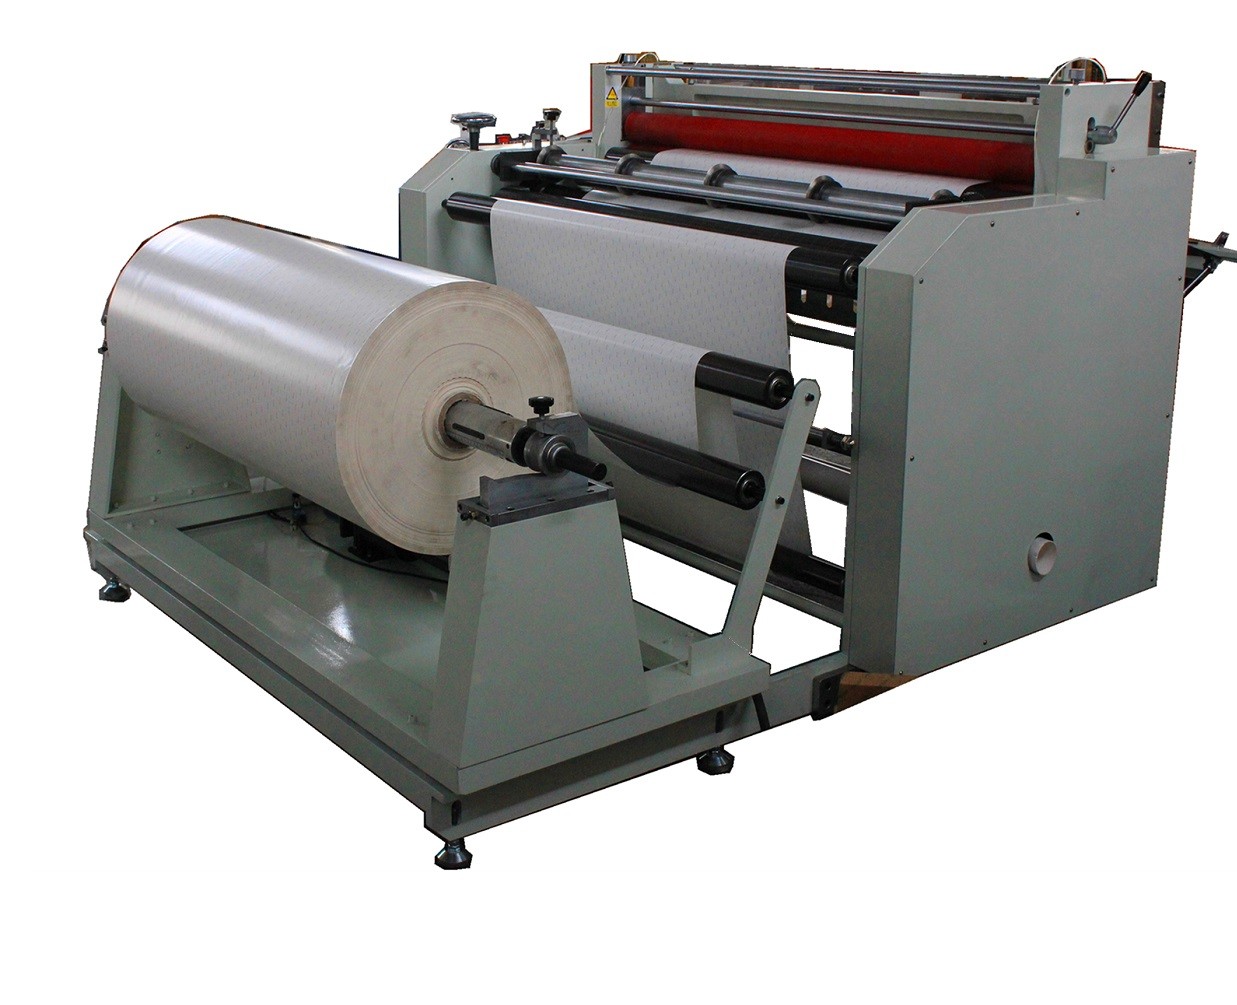 computerized fabric cutting machine for size 1000mm 1400mm with high quality CE approved